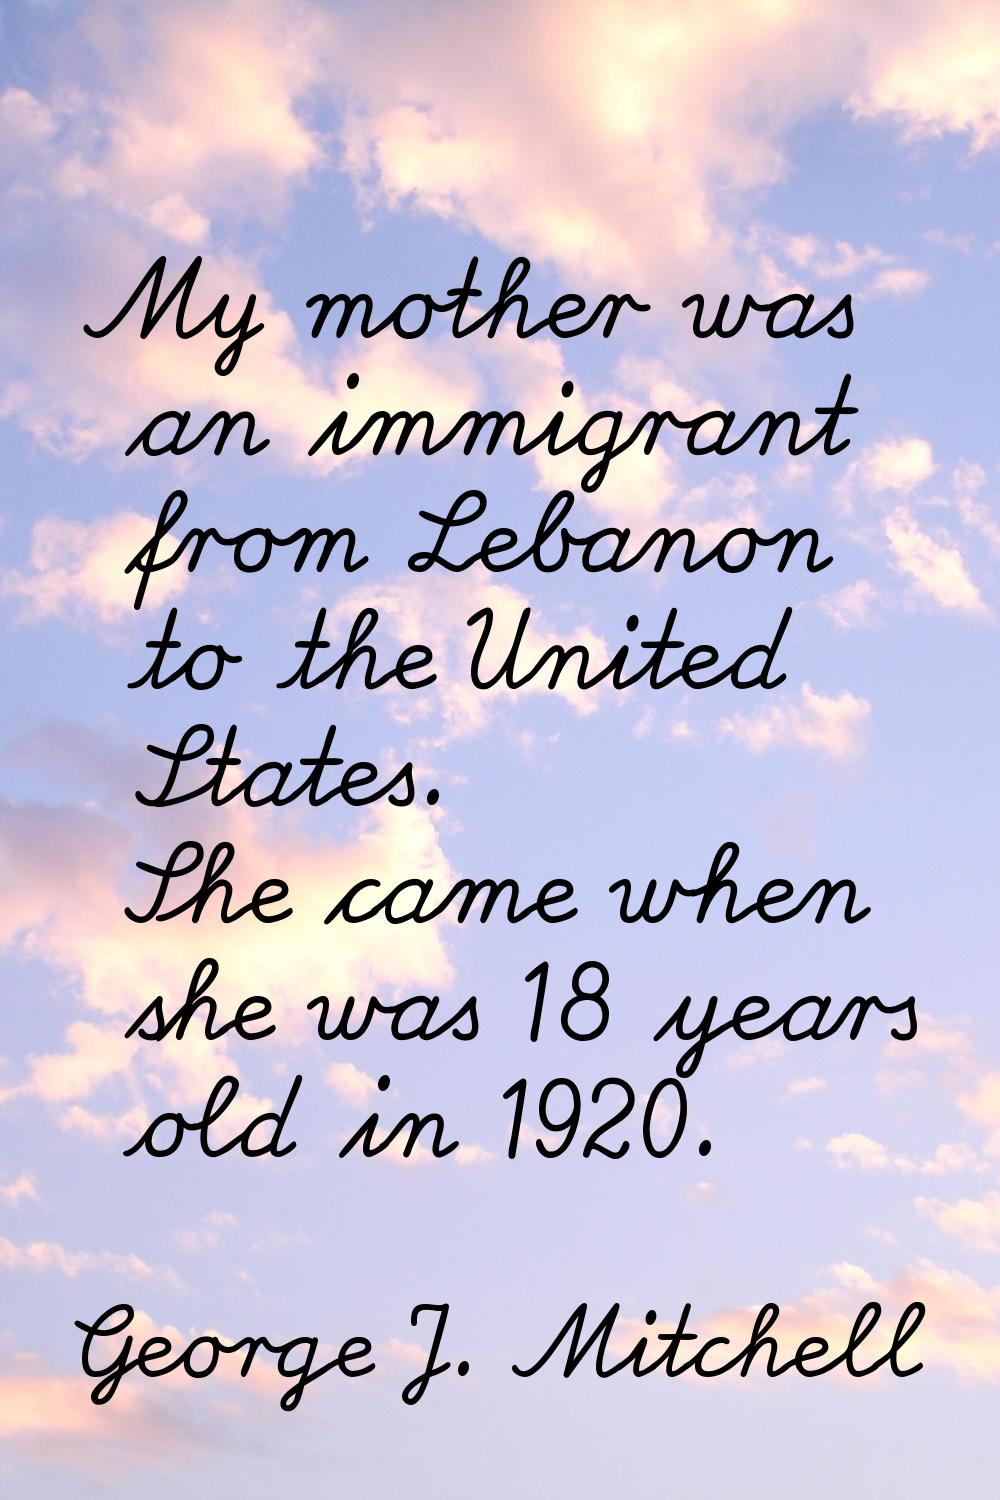 My mother was an immigrant from Lebanon to the United States. She came when she was 18 years old in